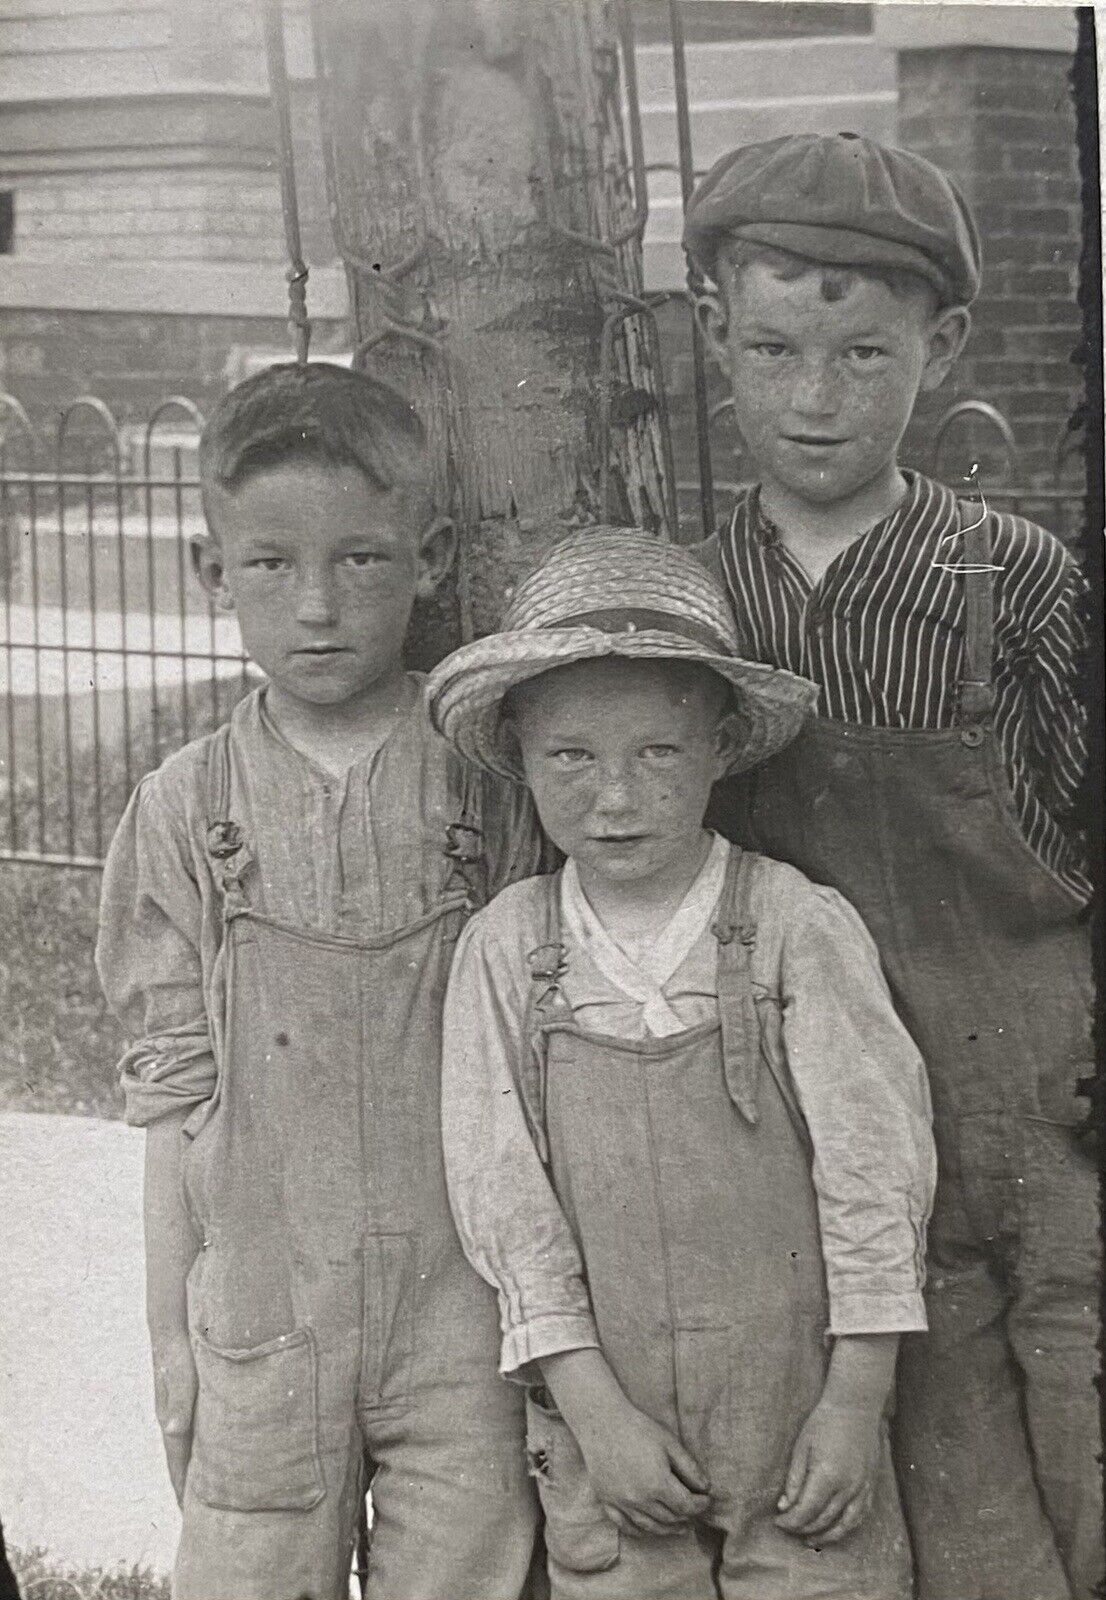 Cute Little Boys in Overalls Young Brothers Antique Vintage Photo